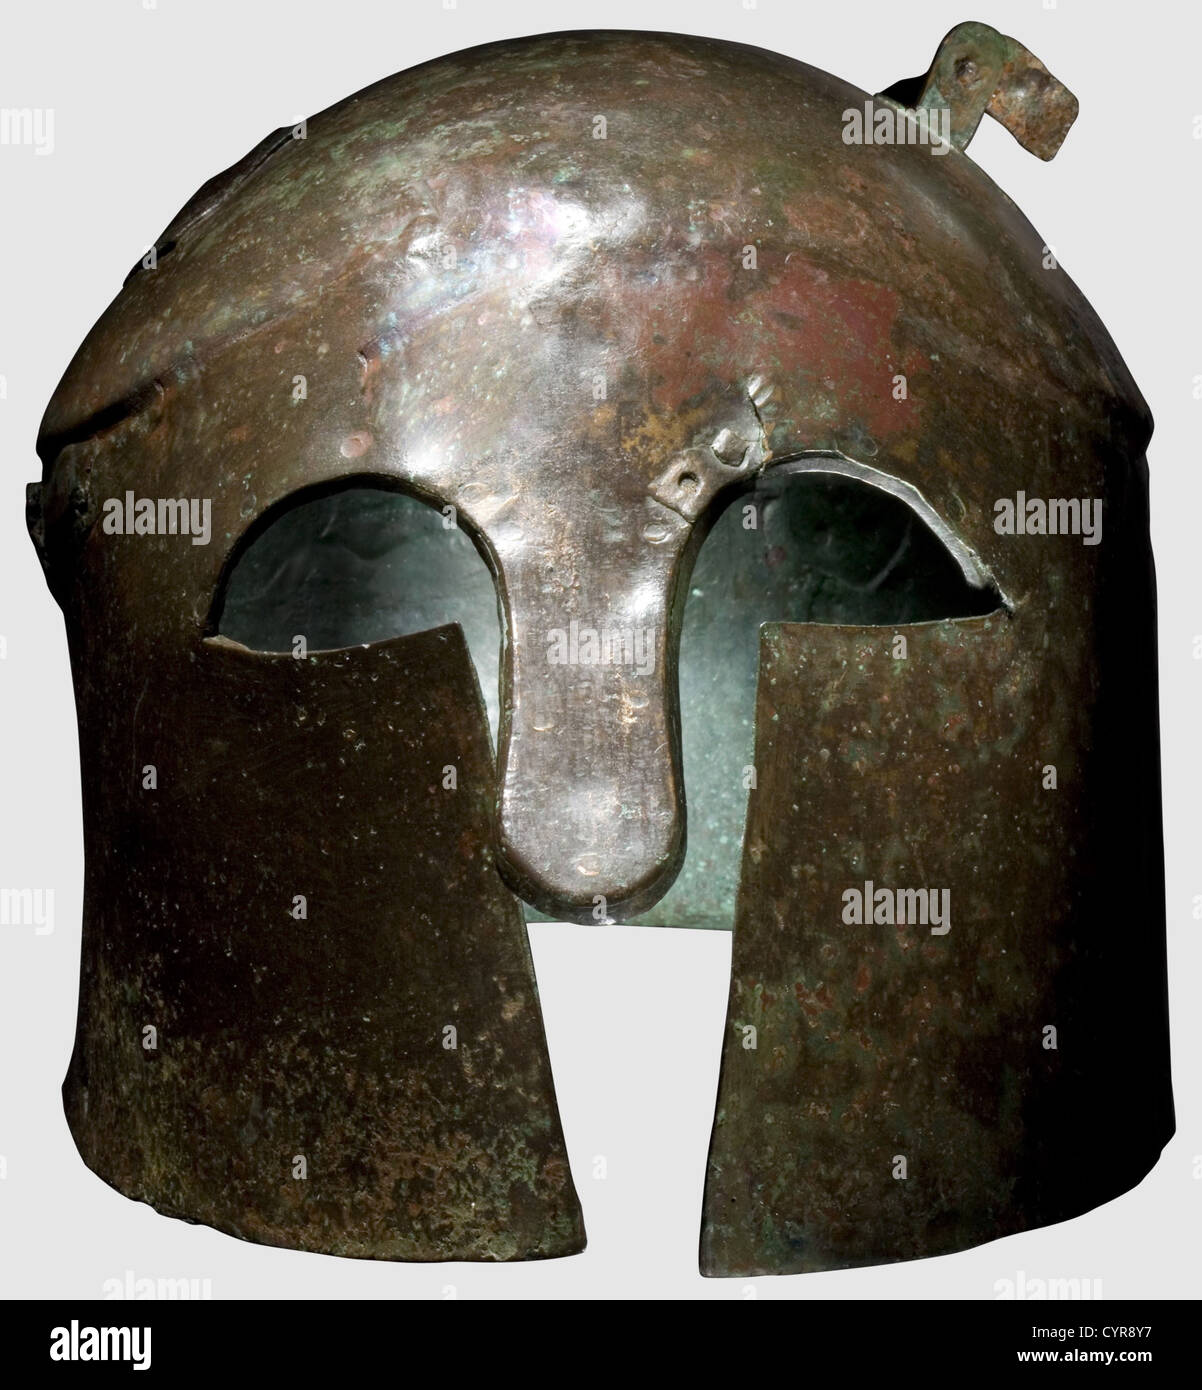 A Corinthian type helmet,6th/5th century B.C. Bronze. Compact skull with slightly offset and flattened calotte,indistinct brow gable and long,closely set cheek pieces,remains of a crest holder riveted to the calotte. Large eye cutouts,massive nose-guard(ancient repair)attached from the inside to the eyebrows by eleven rivets. Narrow flange at the nape. On either side a pierced hole for the attachment of a chinstrap,on the right side two affixed oblong sheets(ancient repair). Height 17.5 cm,weight 788 g. Red-brown patina,partially green corrosion,sli,Additional-Rights-Clearences-Not Available Stock Photo